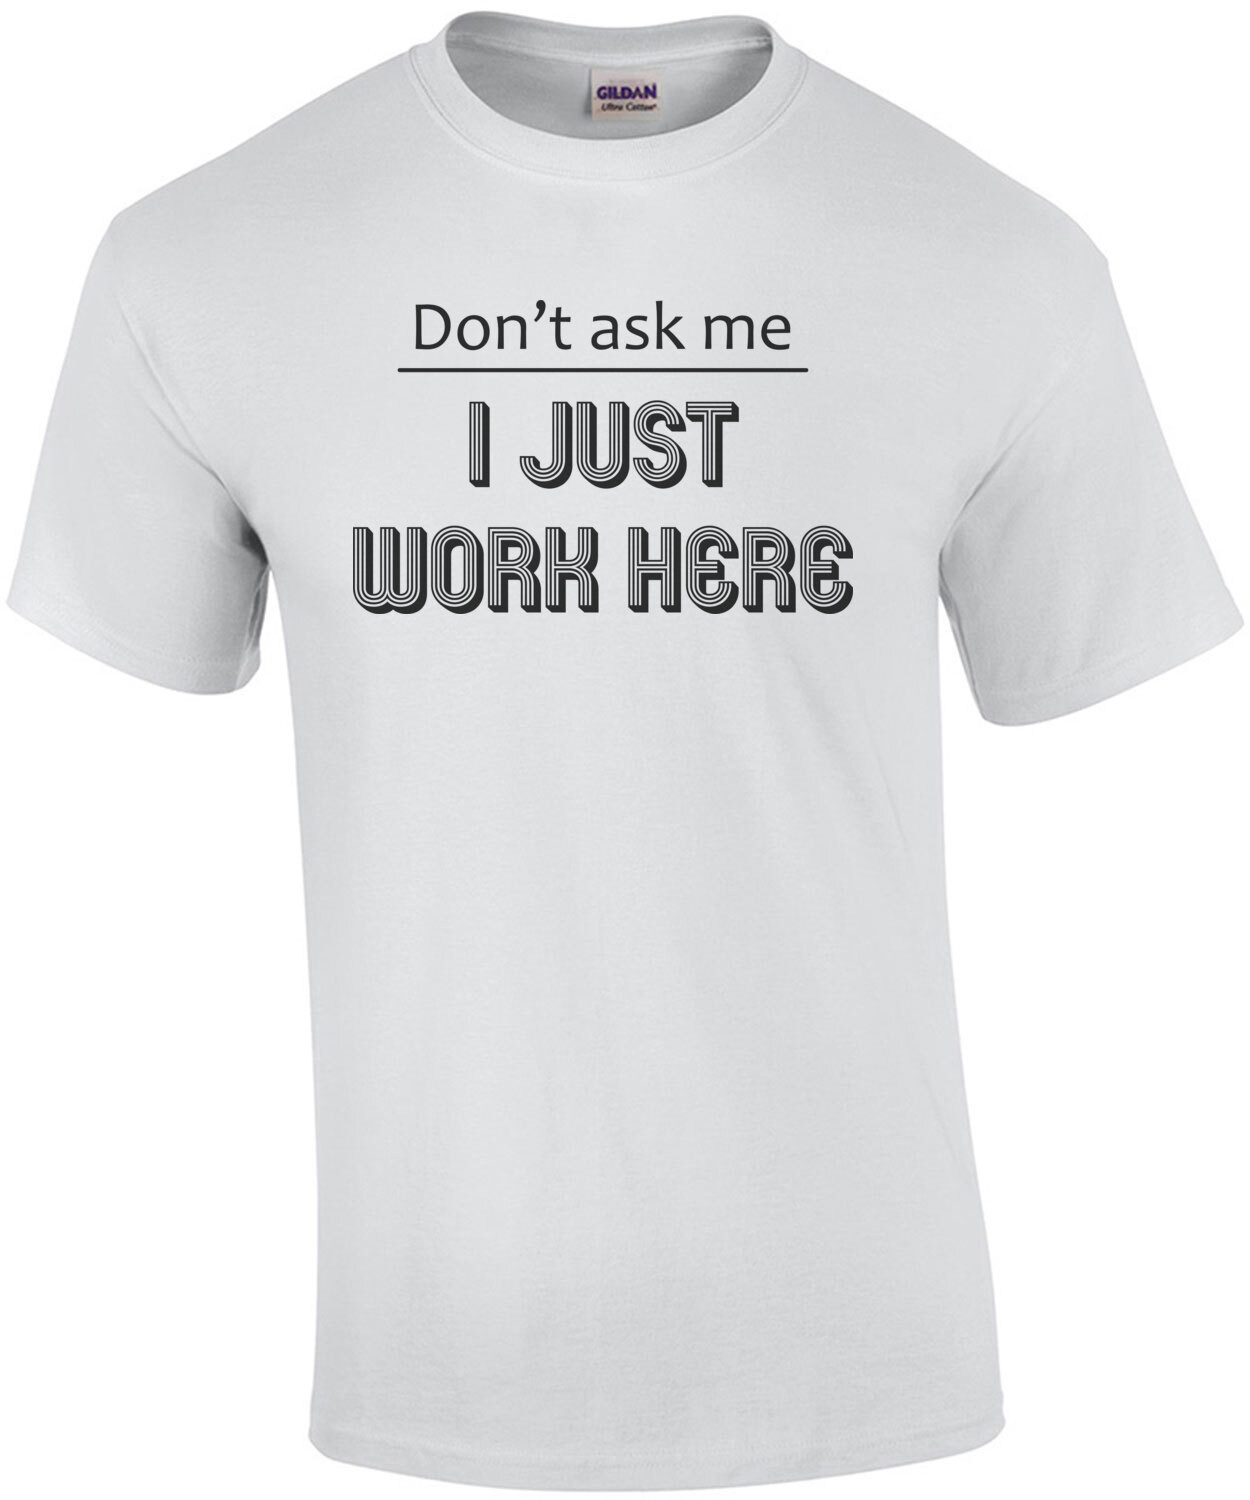 Don't ask me I just work here. T-Shirt